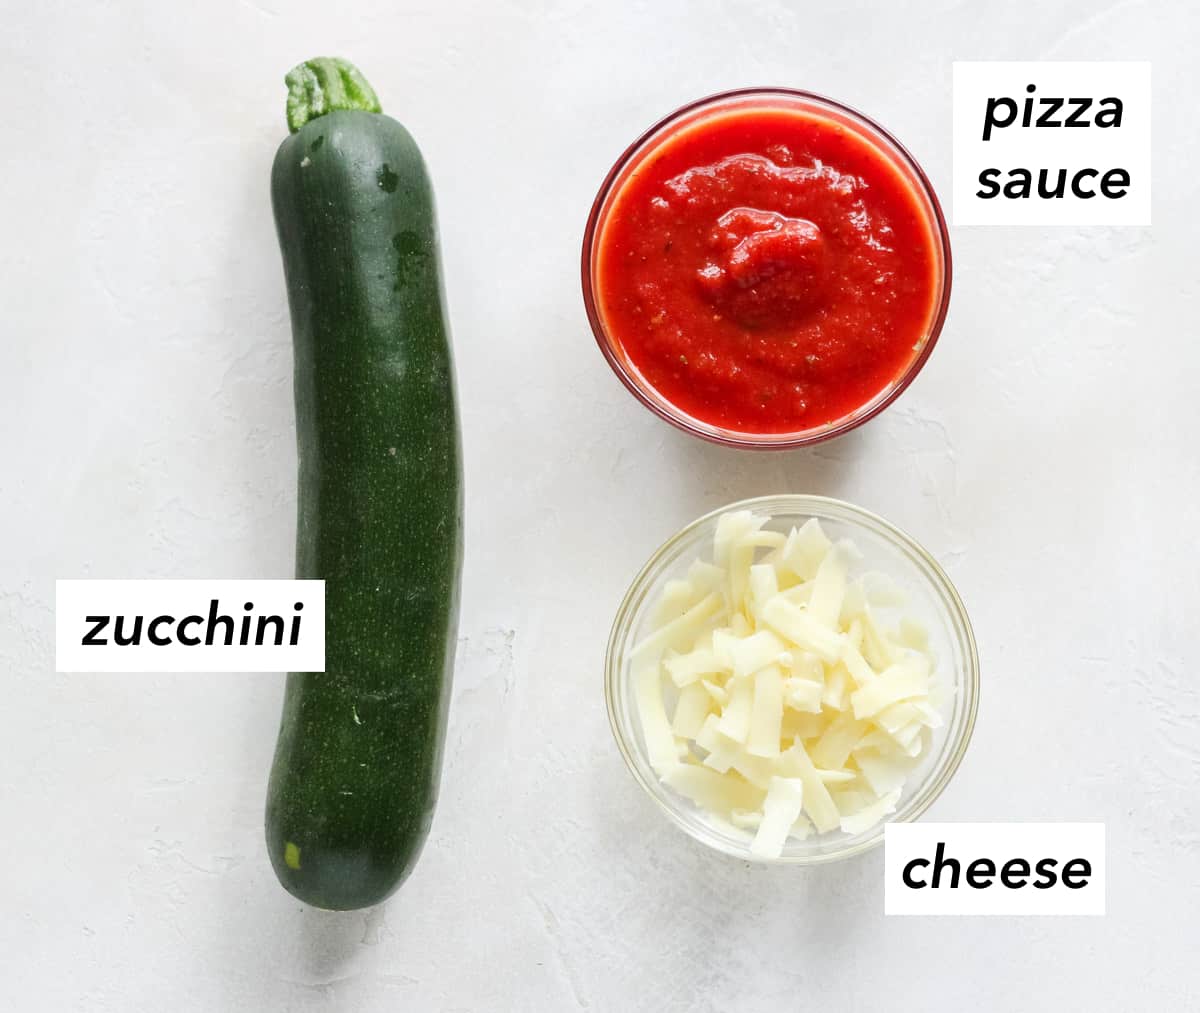 zucchini, bowl of shredded cheese, bowl of pizza sauce with text overlay describing ingredients.